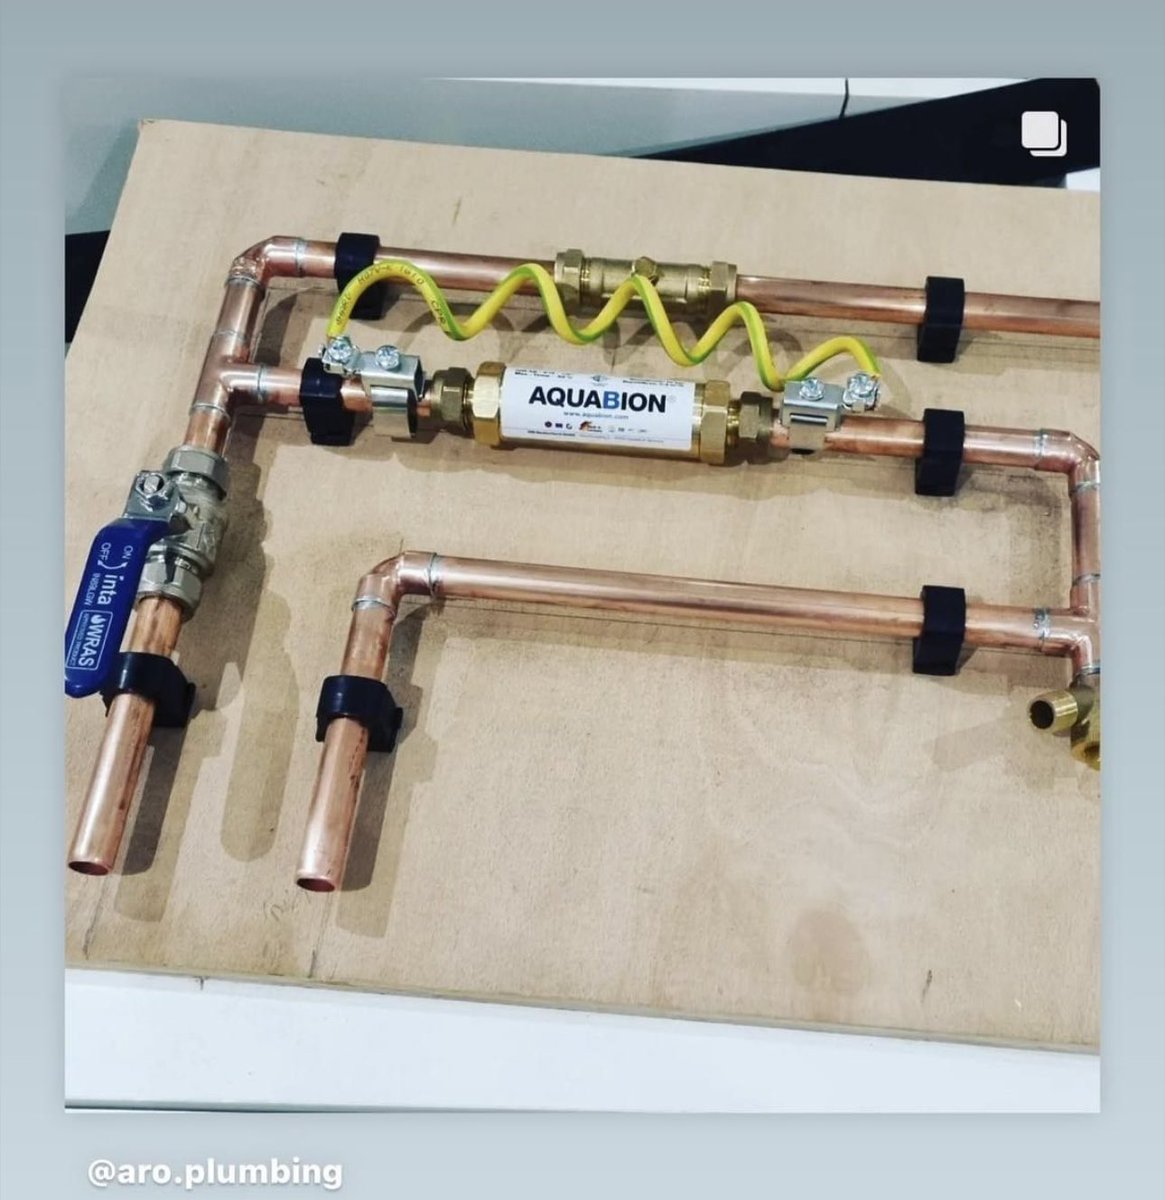 AQUABION limescale installation preparation done by @aro.plumbing
Perfect result. Customer is happy. 
#aquabion #alternative #watersoftener #installation #plumbing #plumbing #protection #sustainable